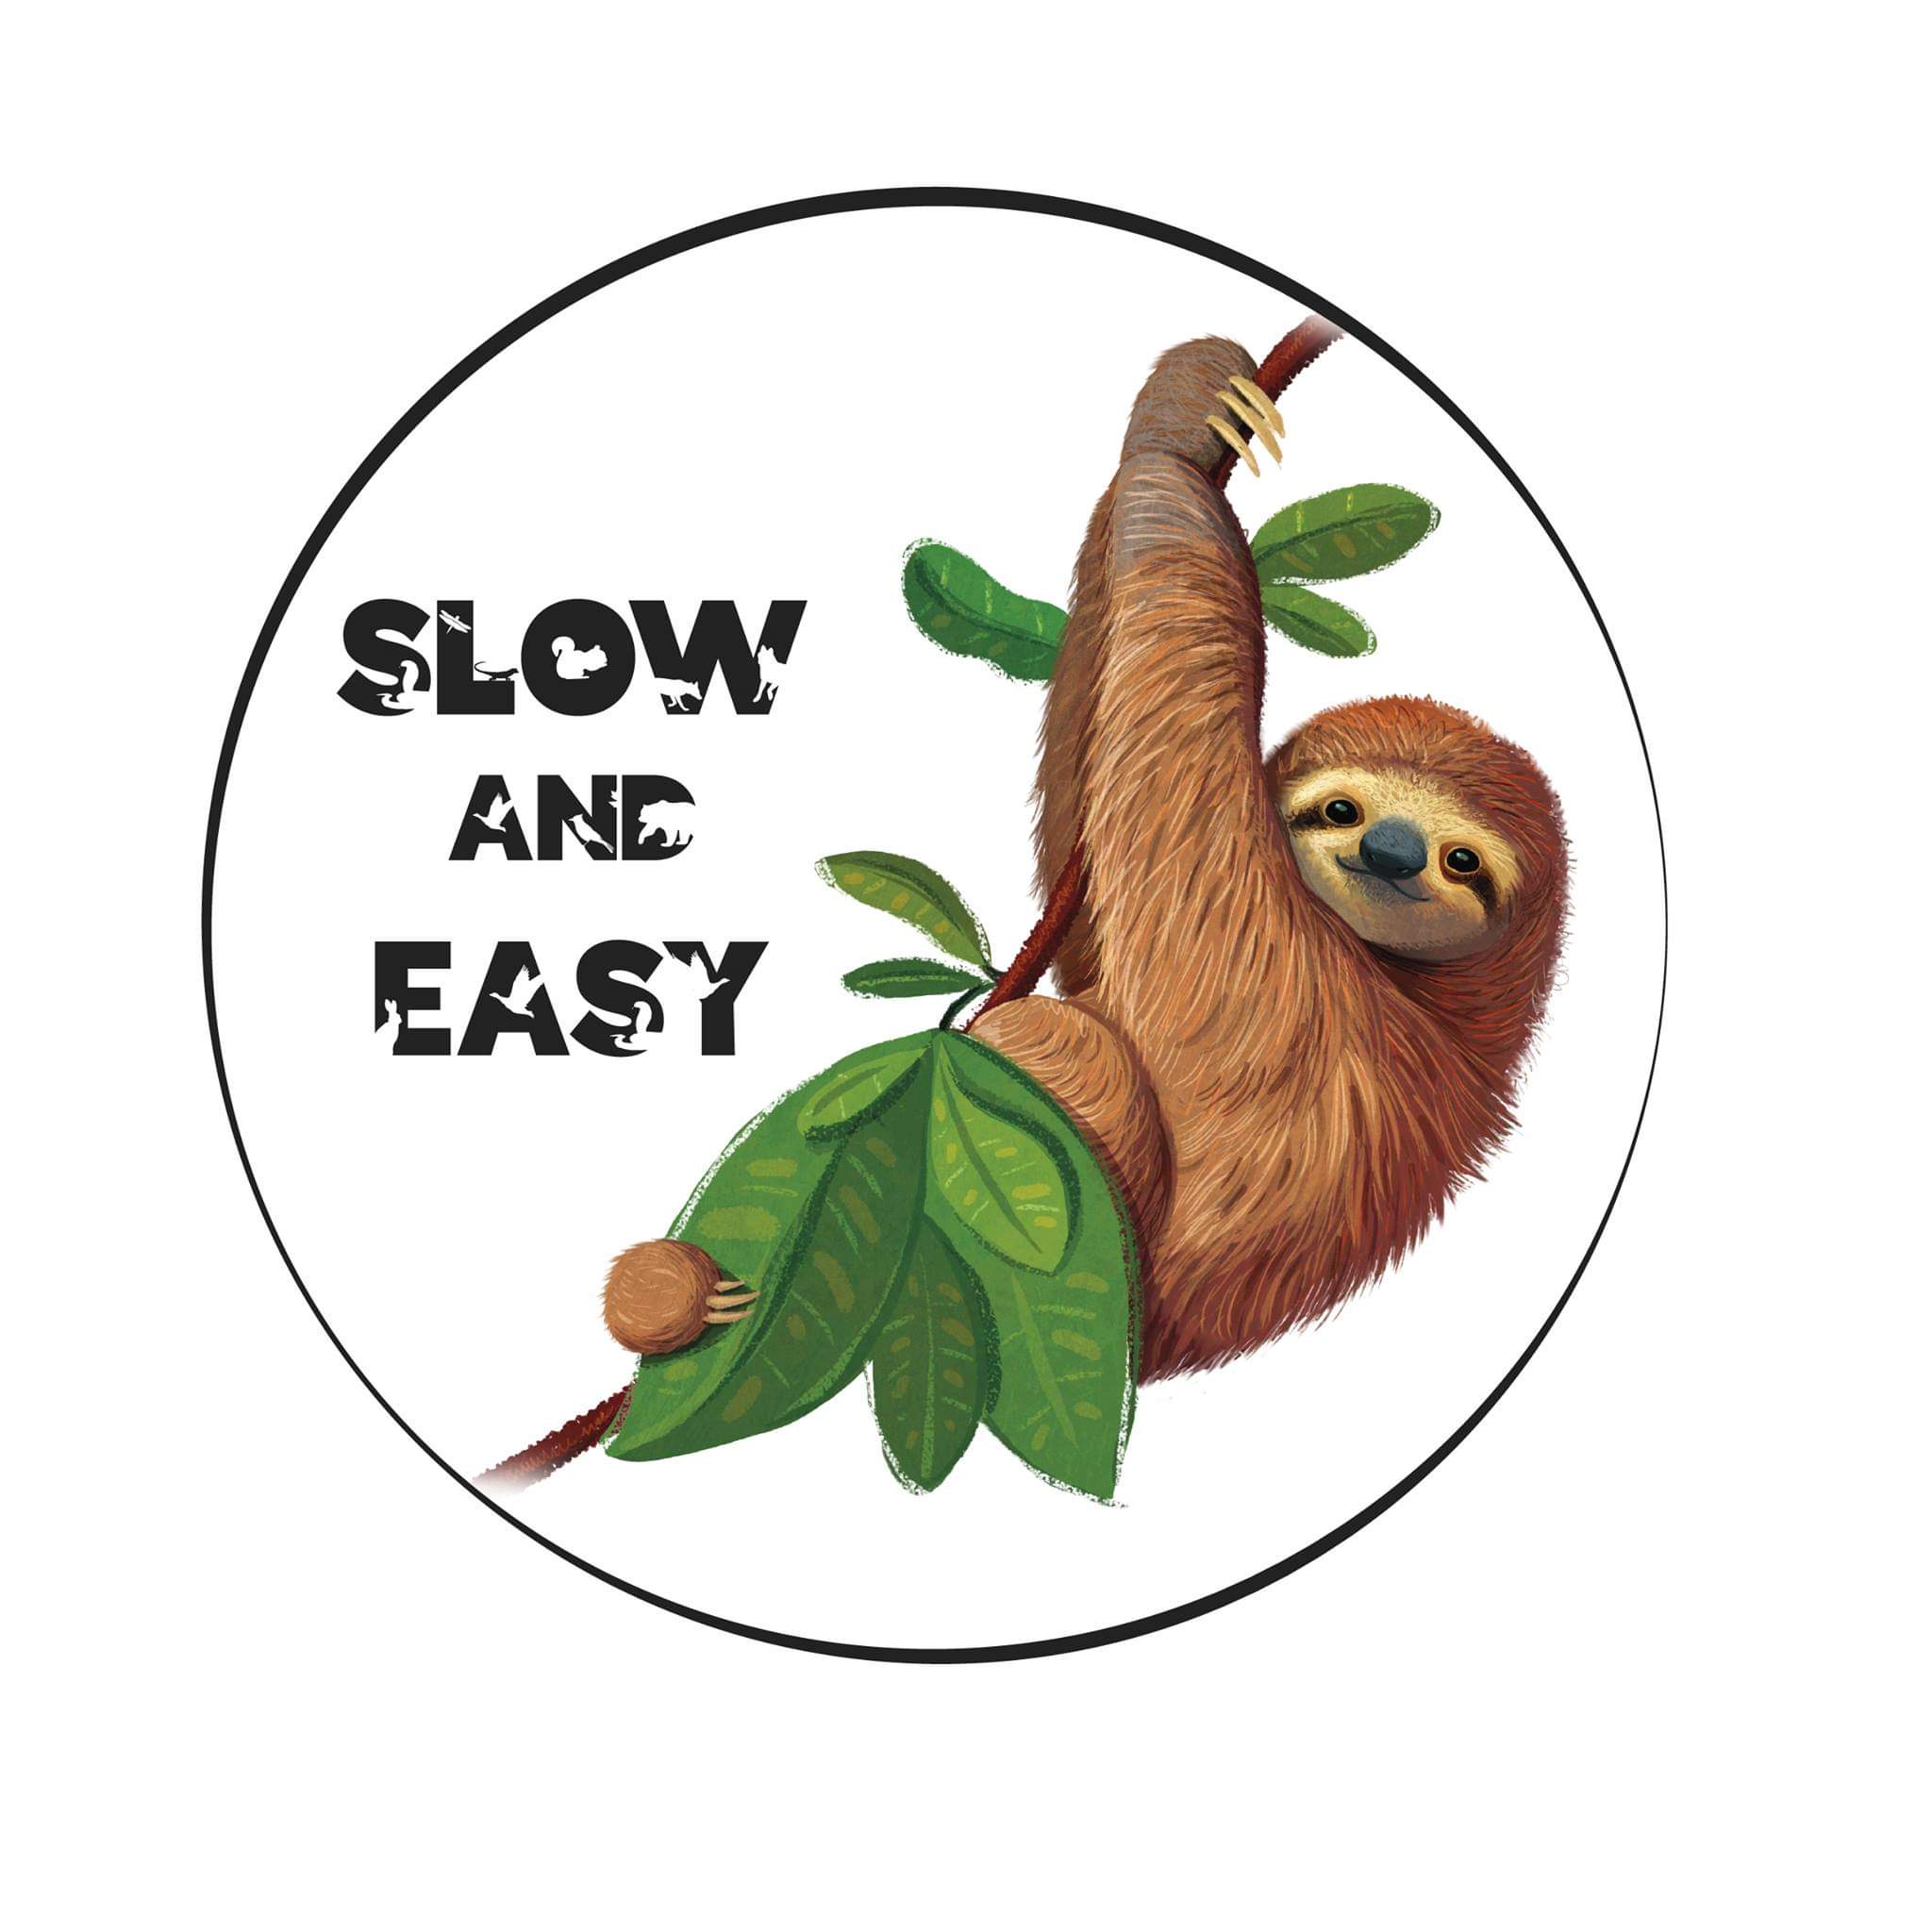 slow_and_easy_sloth.jpg